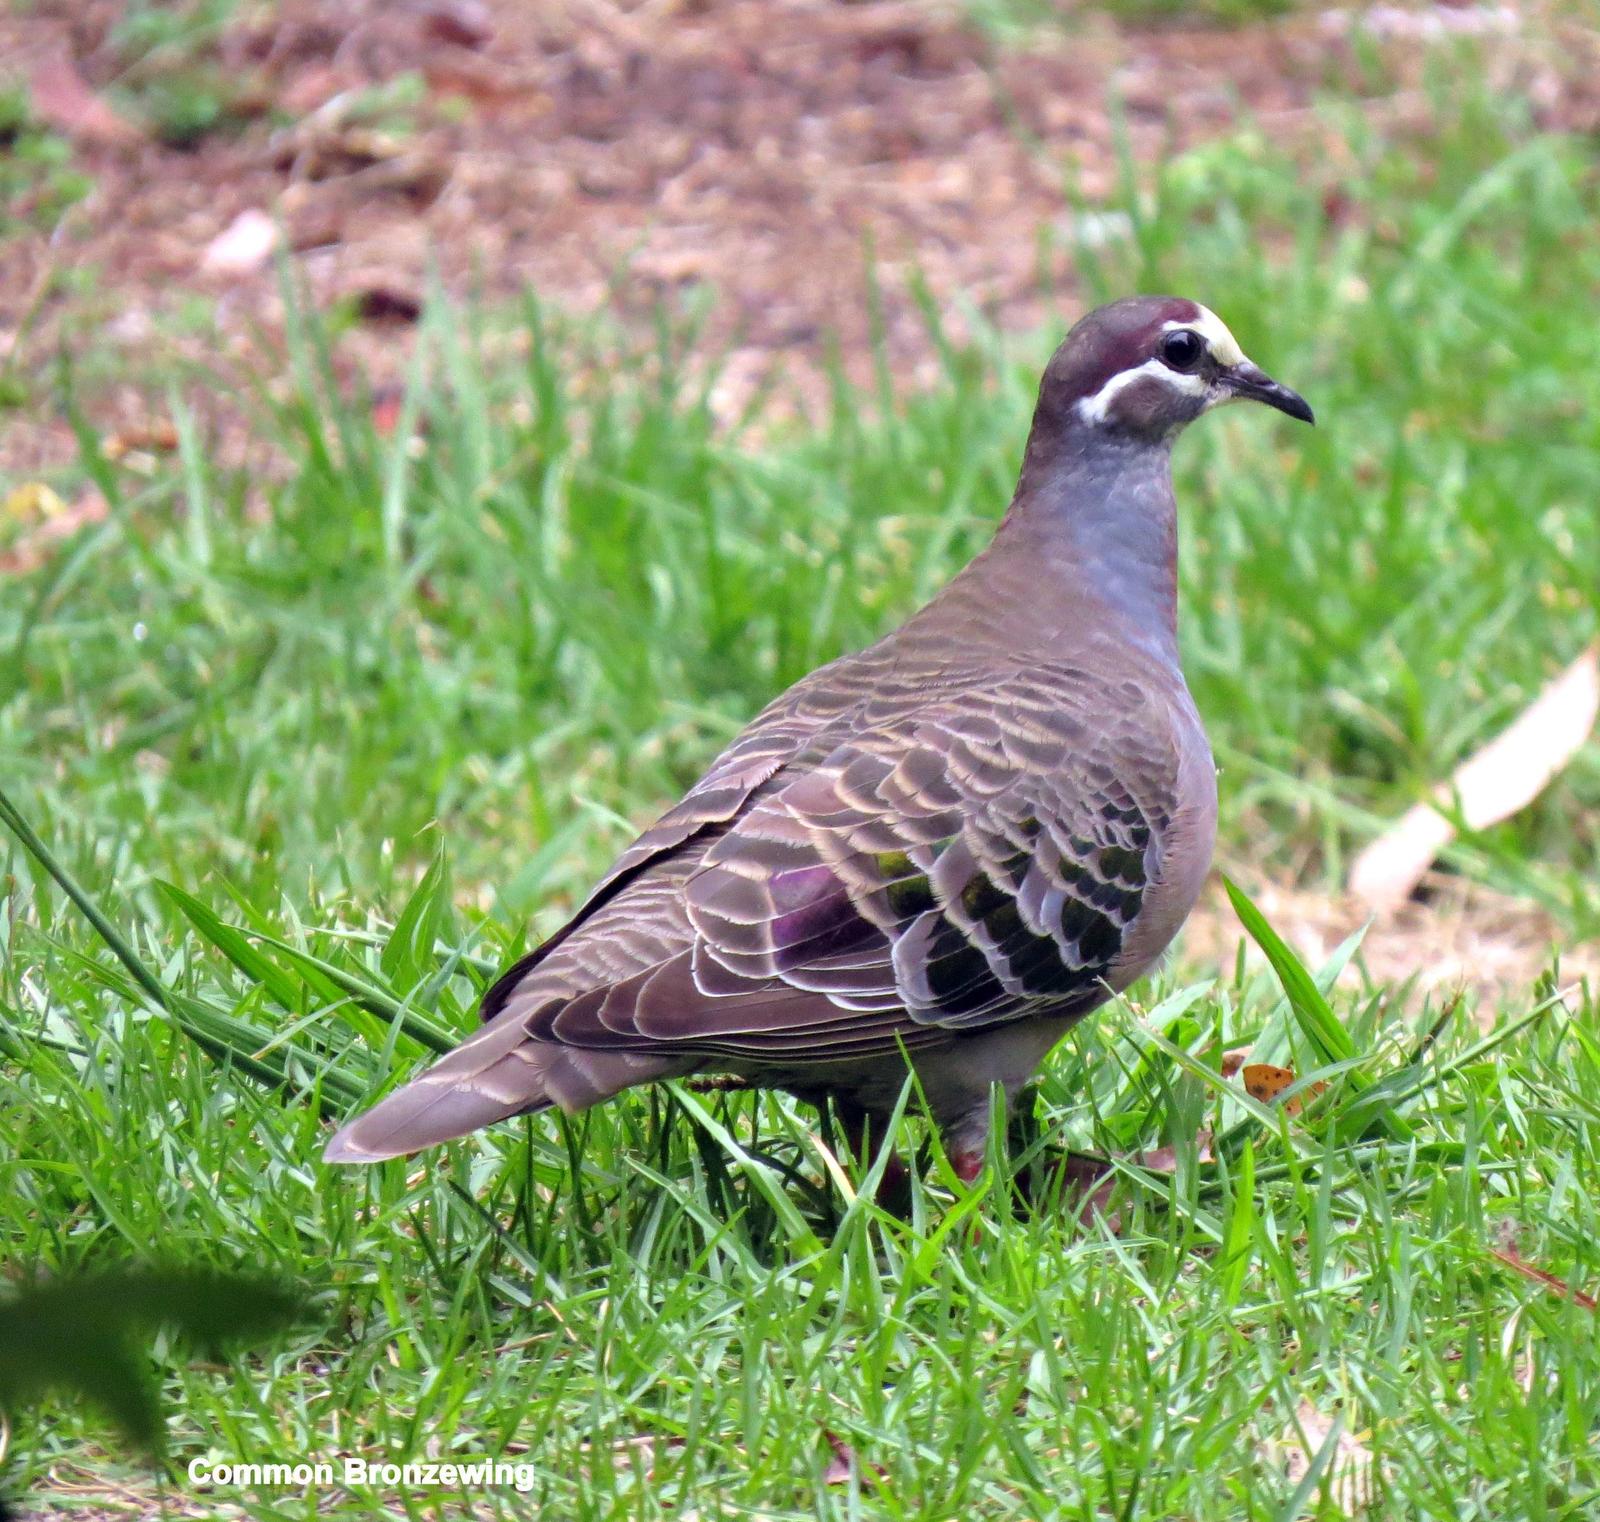 Common Bronzewing Photo by Richard  Lowe